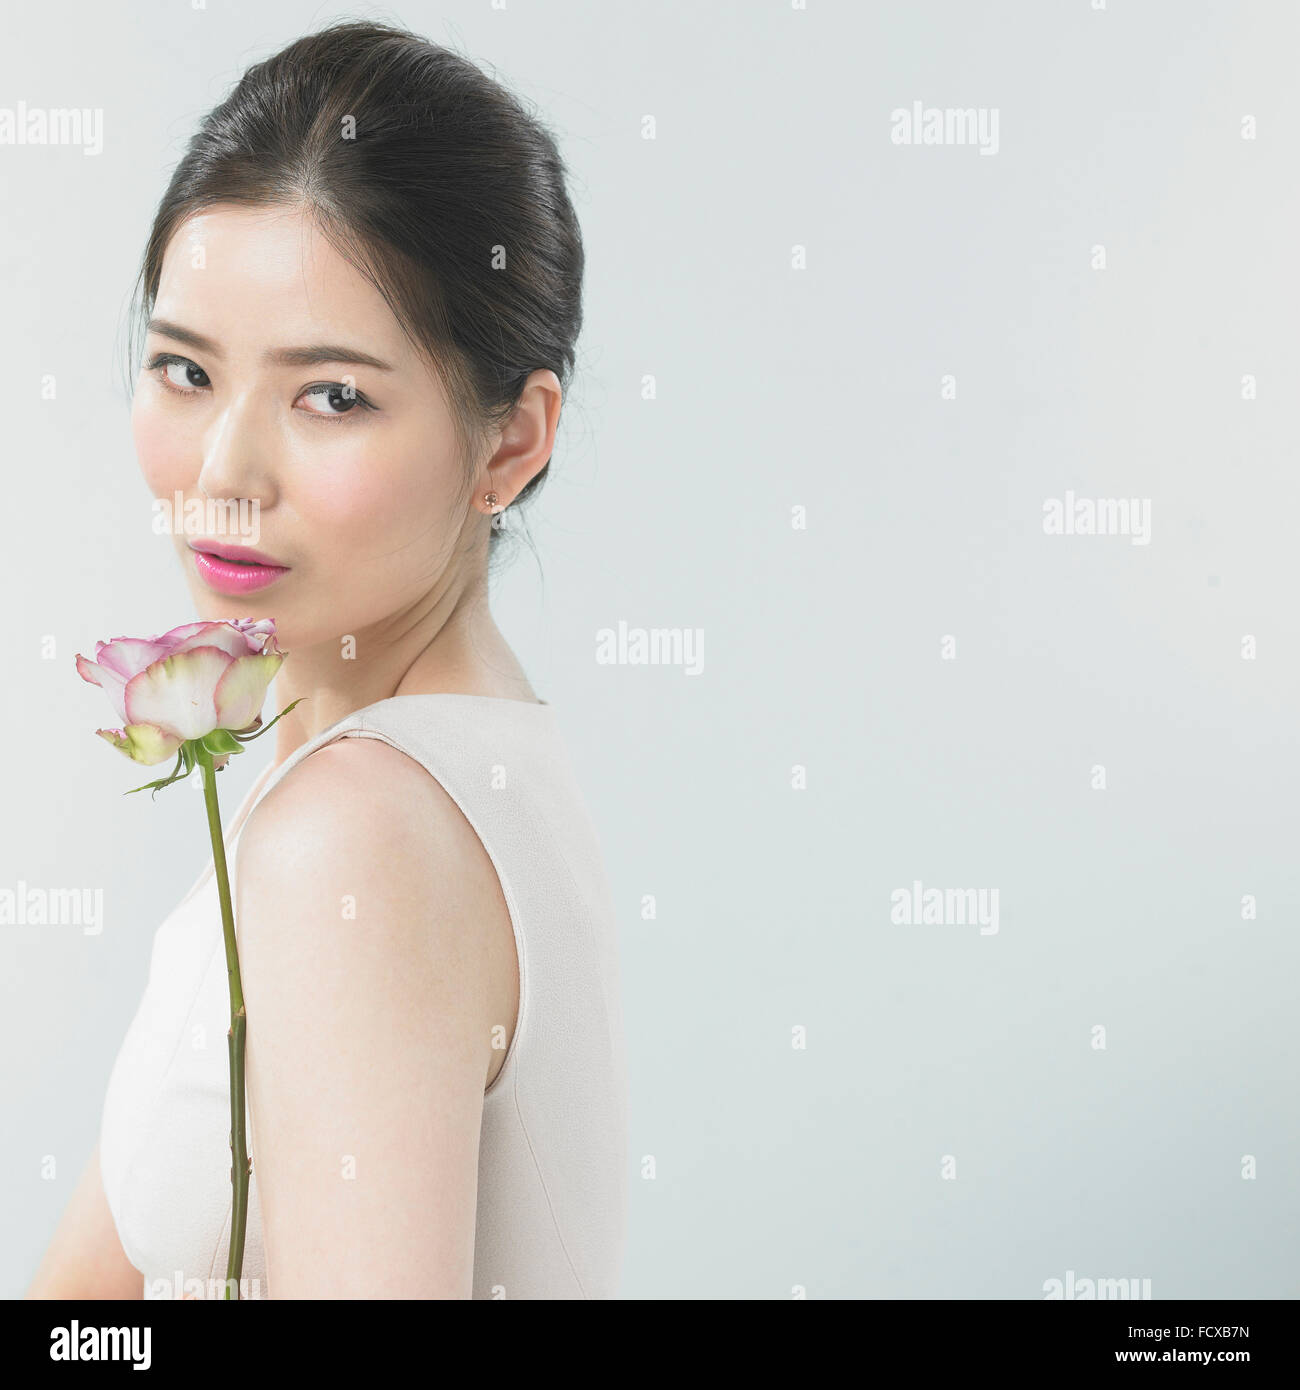 Woman with pink lip make-up with a flower looking aside down Stock Photo